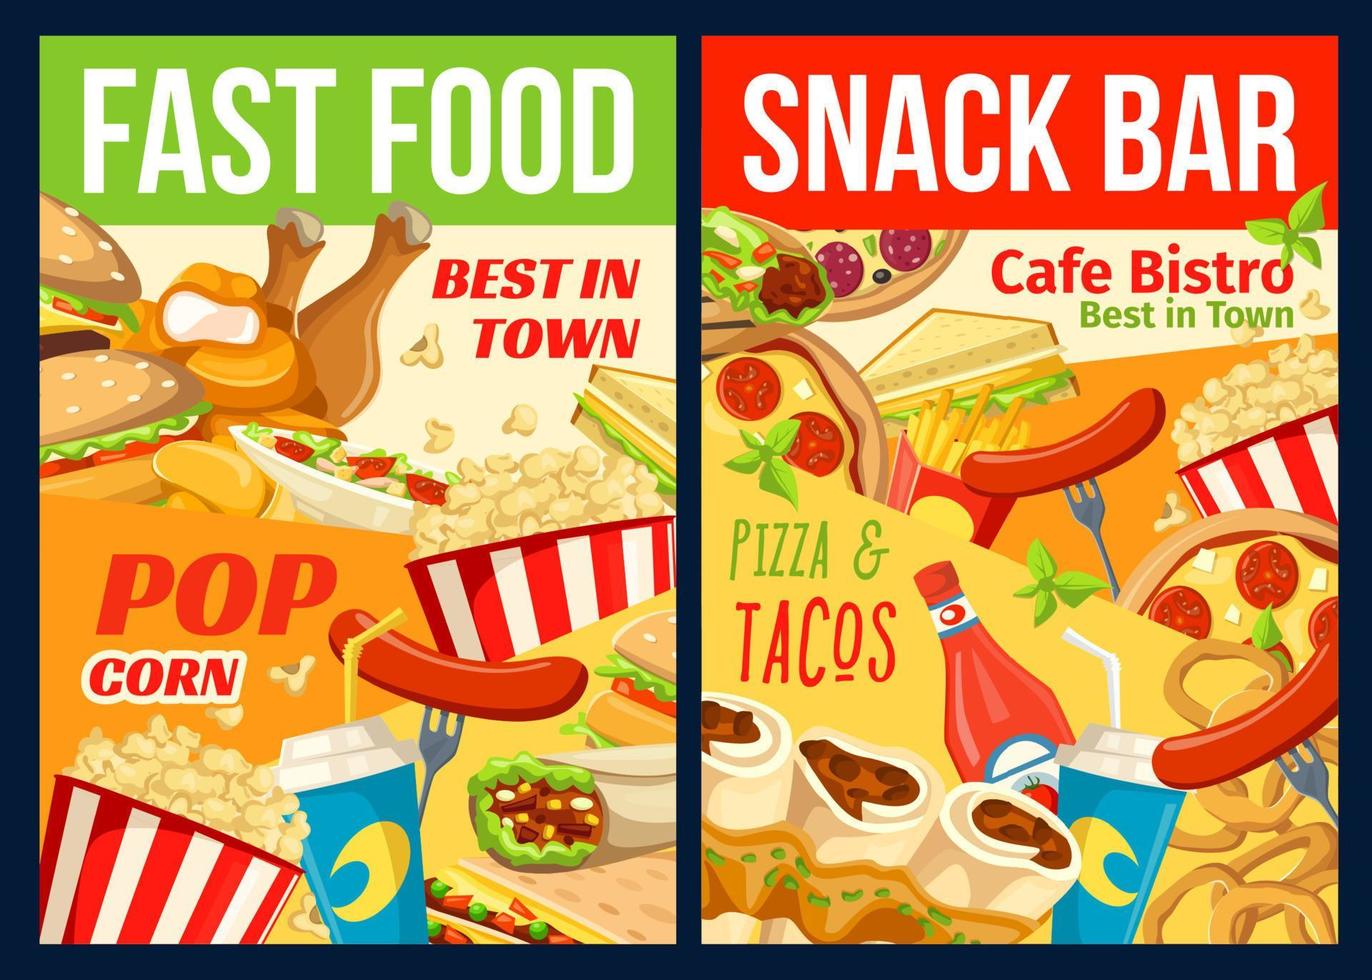 Fast food restaurant lunch meal and drinks vector